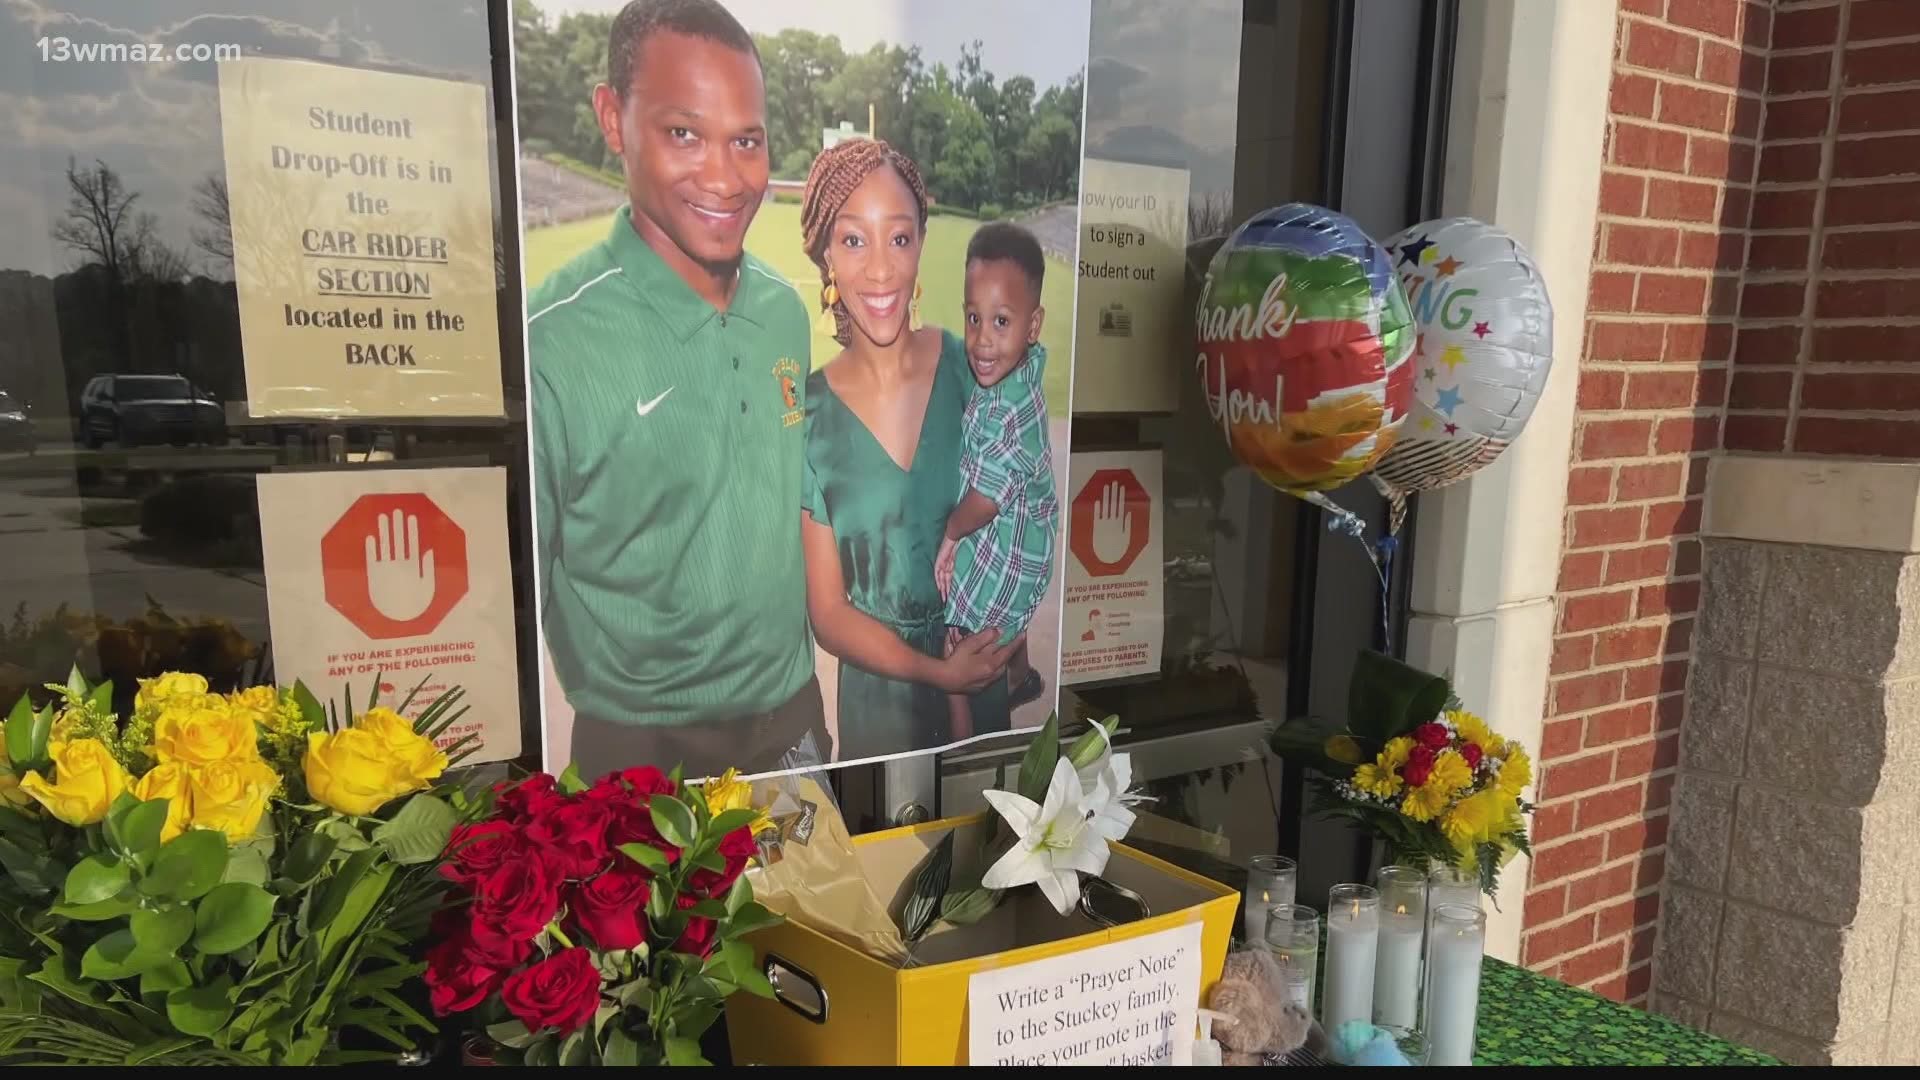 Students and staff across Dublin Schools are remembering principal Jaroy Stuckey in different ways